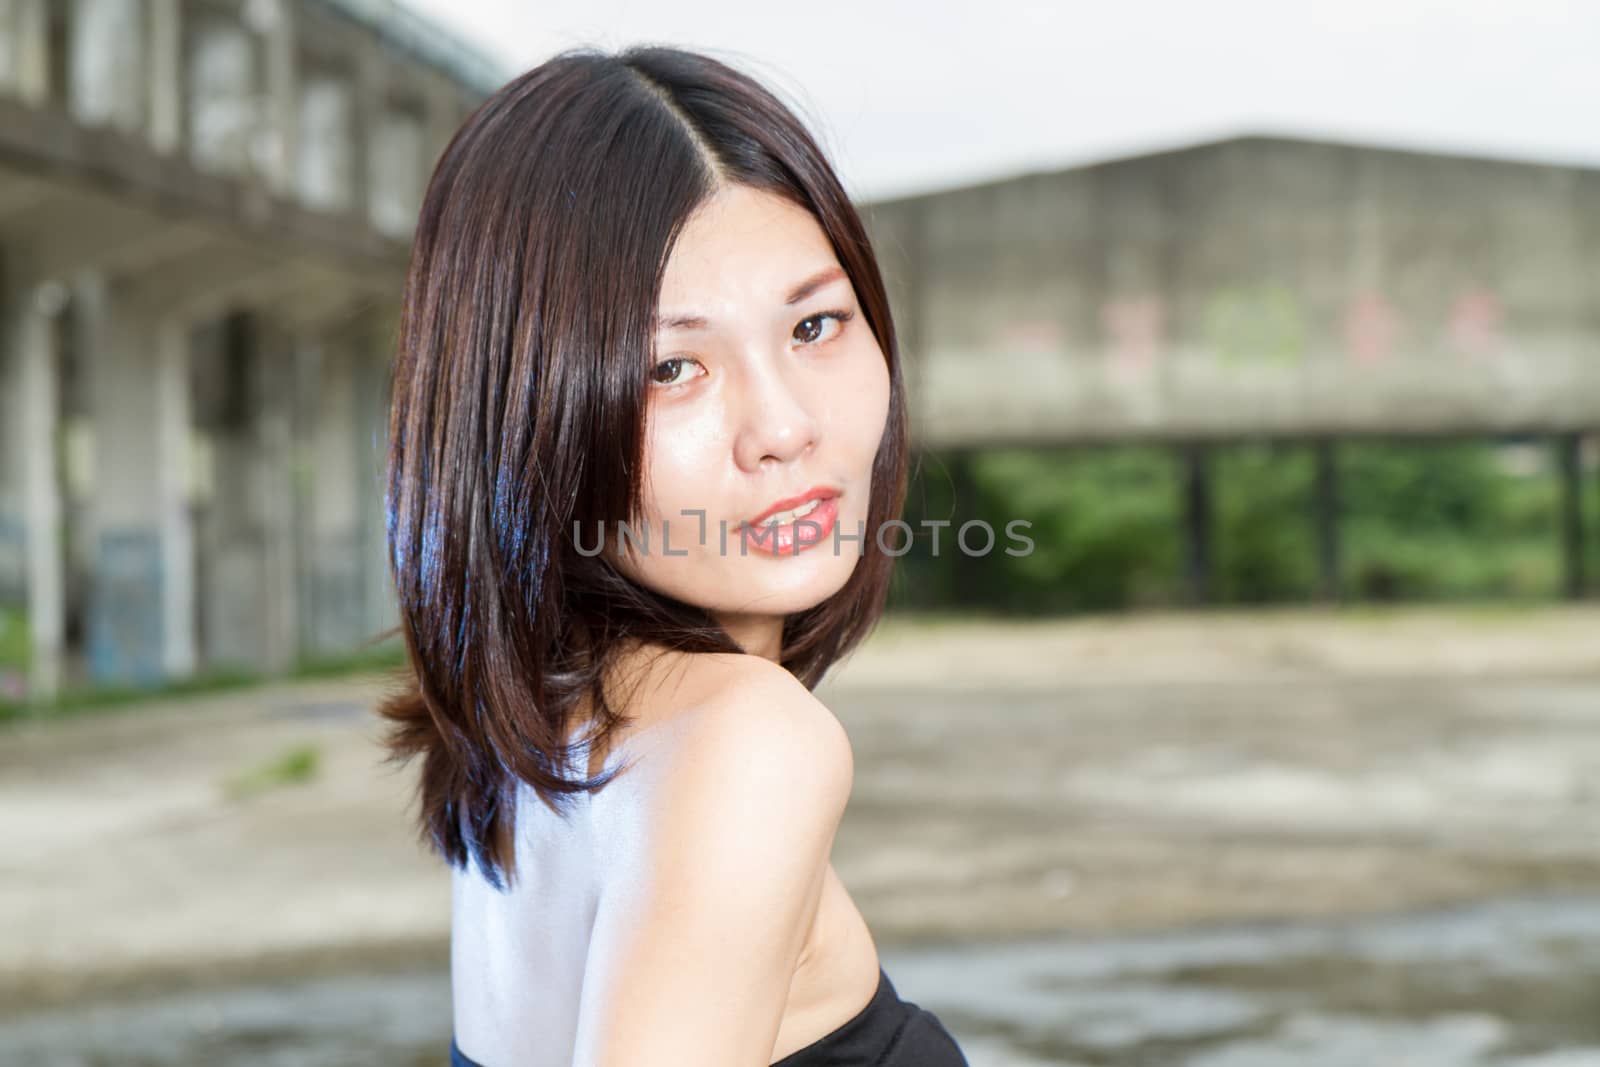 Asian woman at abandoned building by imagesbykenny